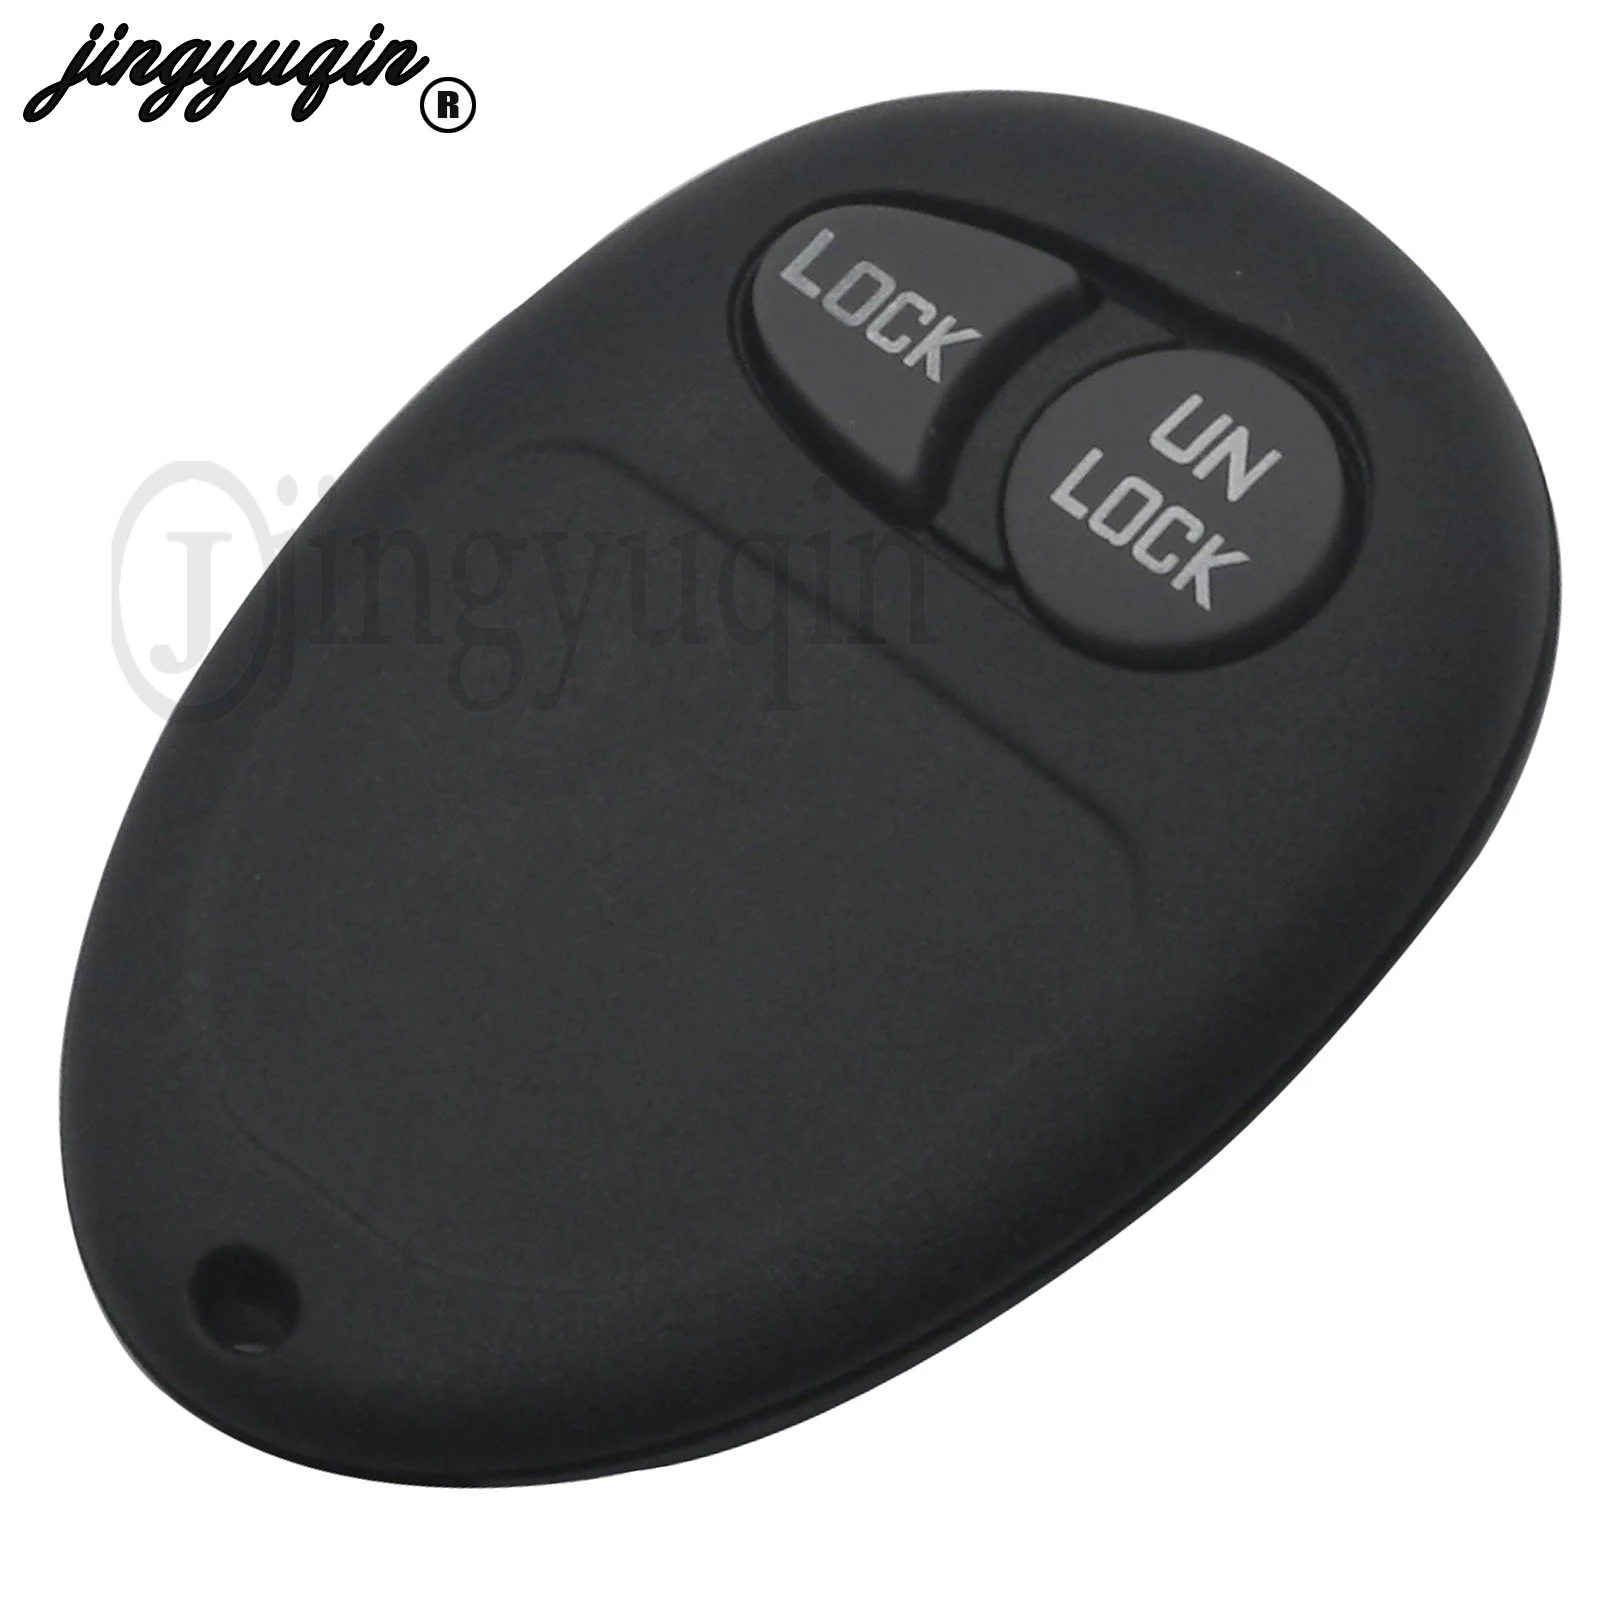 

jingyuqin 2 Buttons Replacement Remote Car Key Shell Case Cover For Buick Pontiac Montana Chevy Venture Olds Silhouette Fob